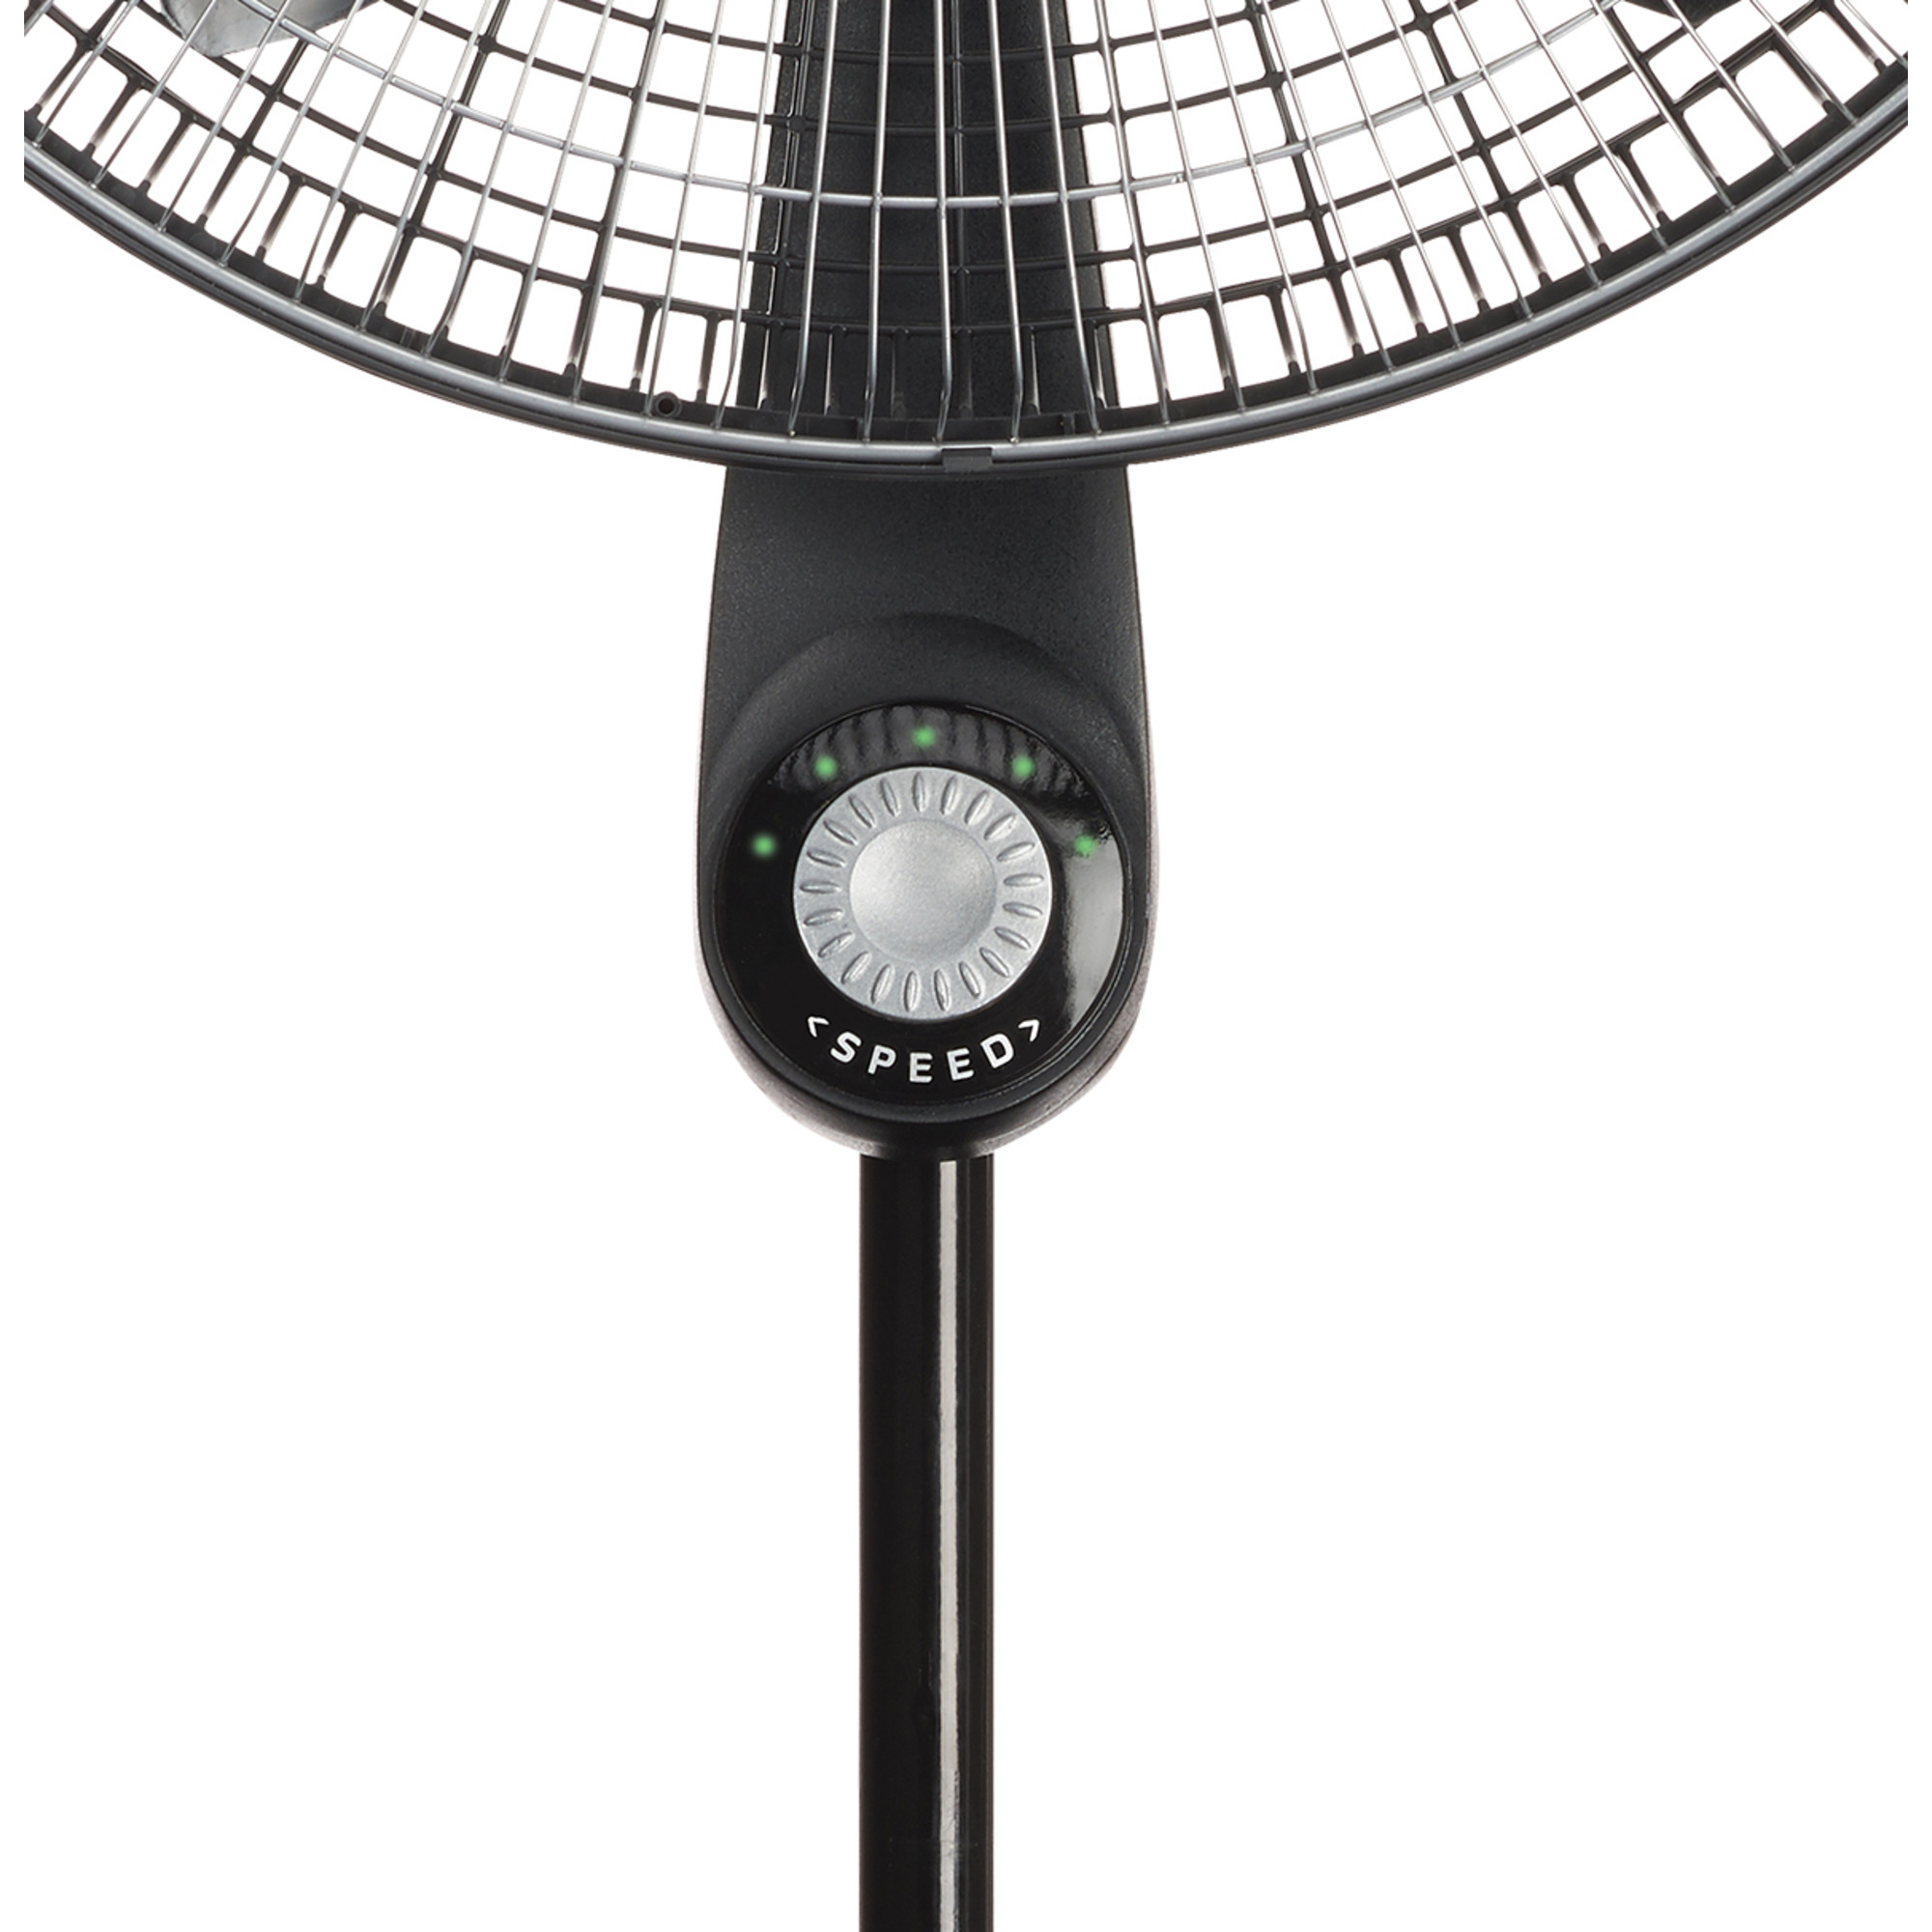 Lasko 18" 5-Speed High Performance Pedestal Fan with Remote, 54" H, Black, S18602, New - image 3 of 7